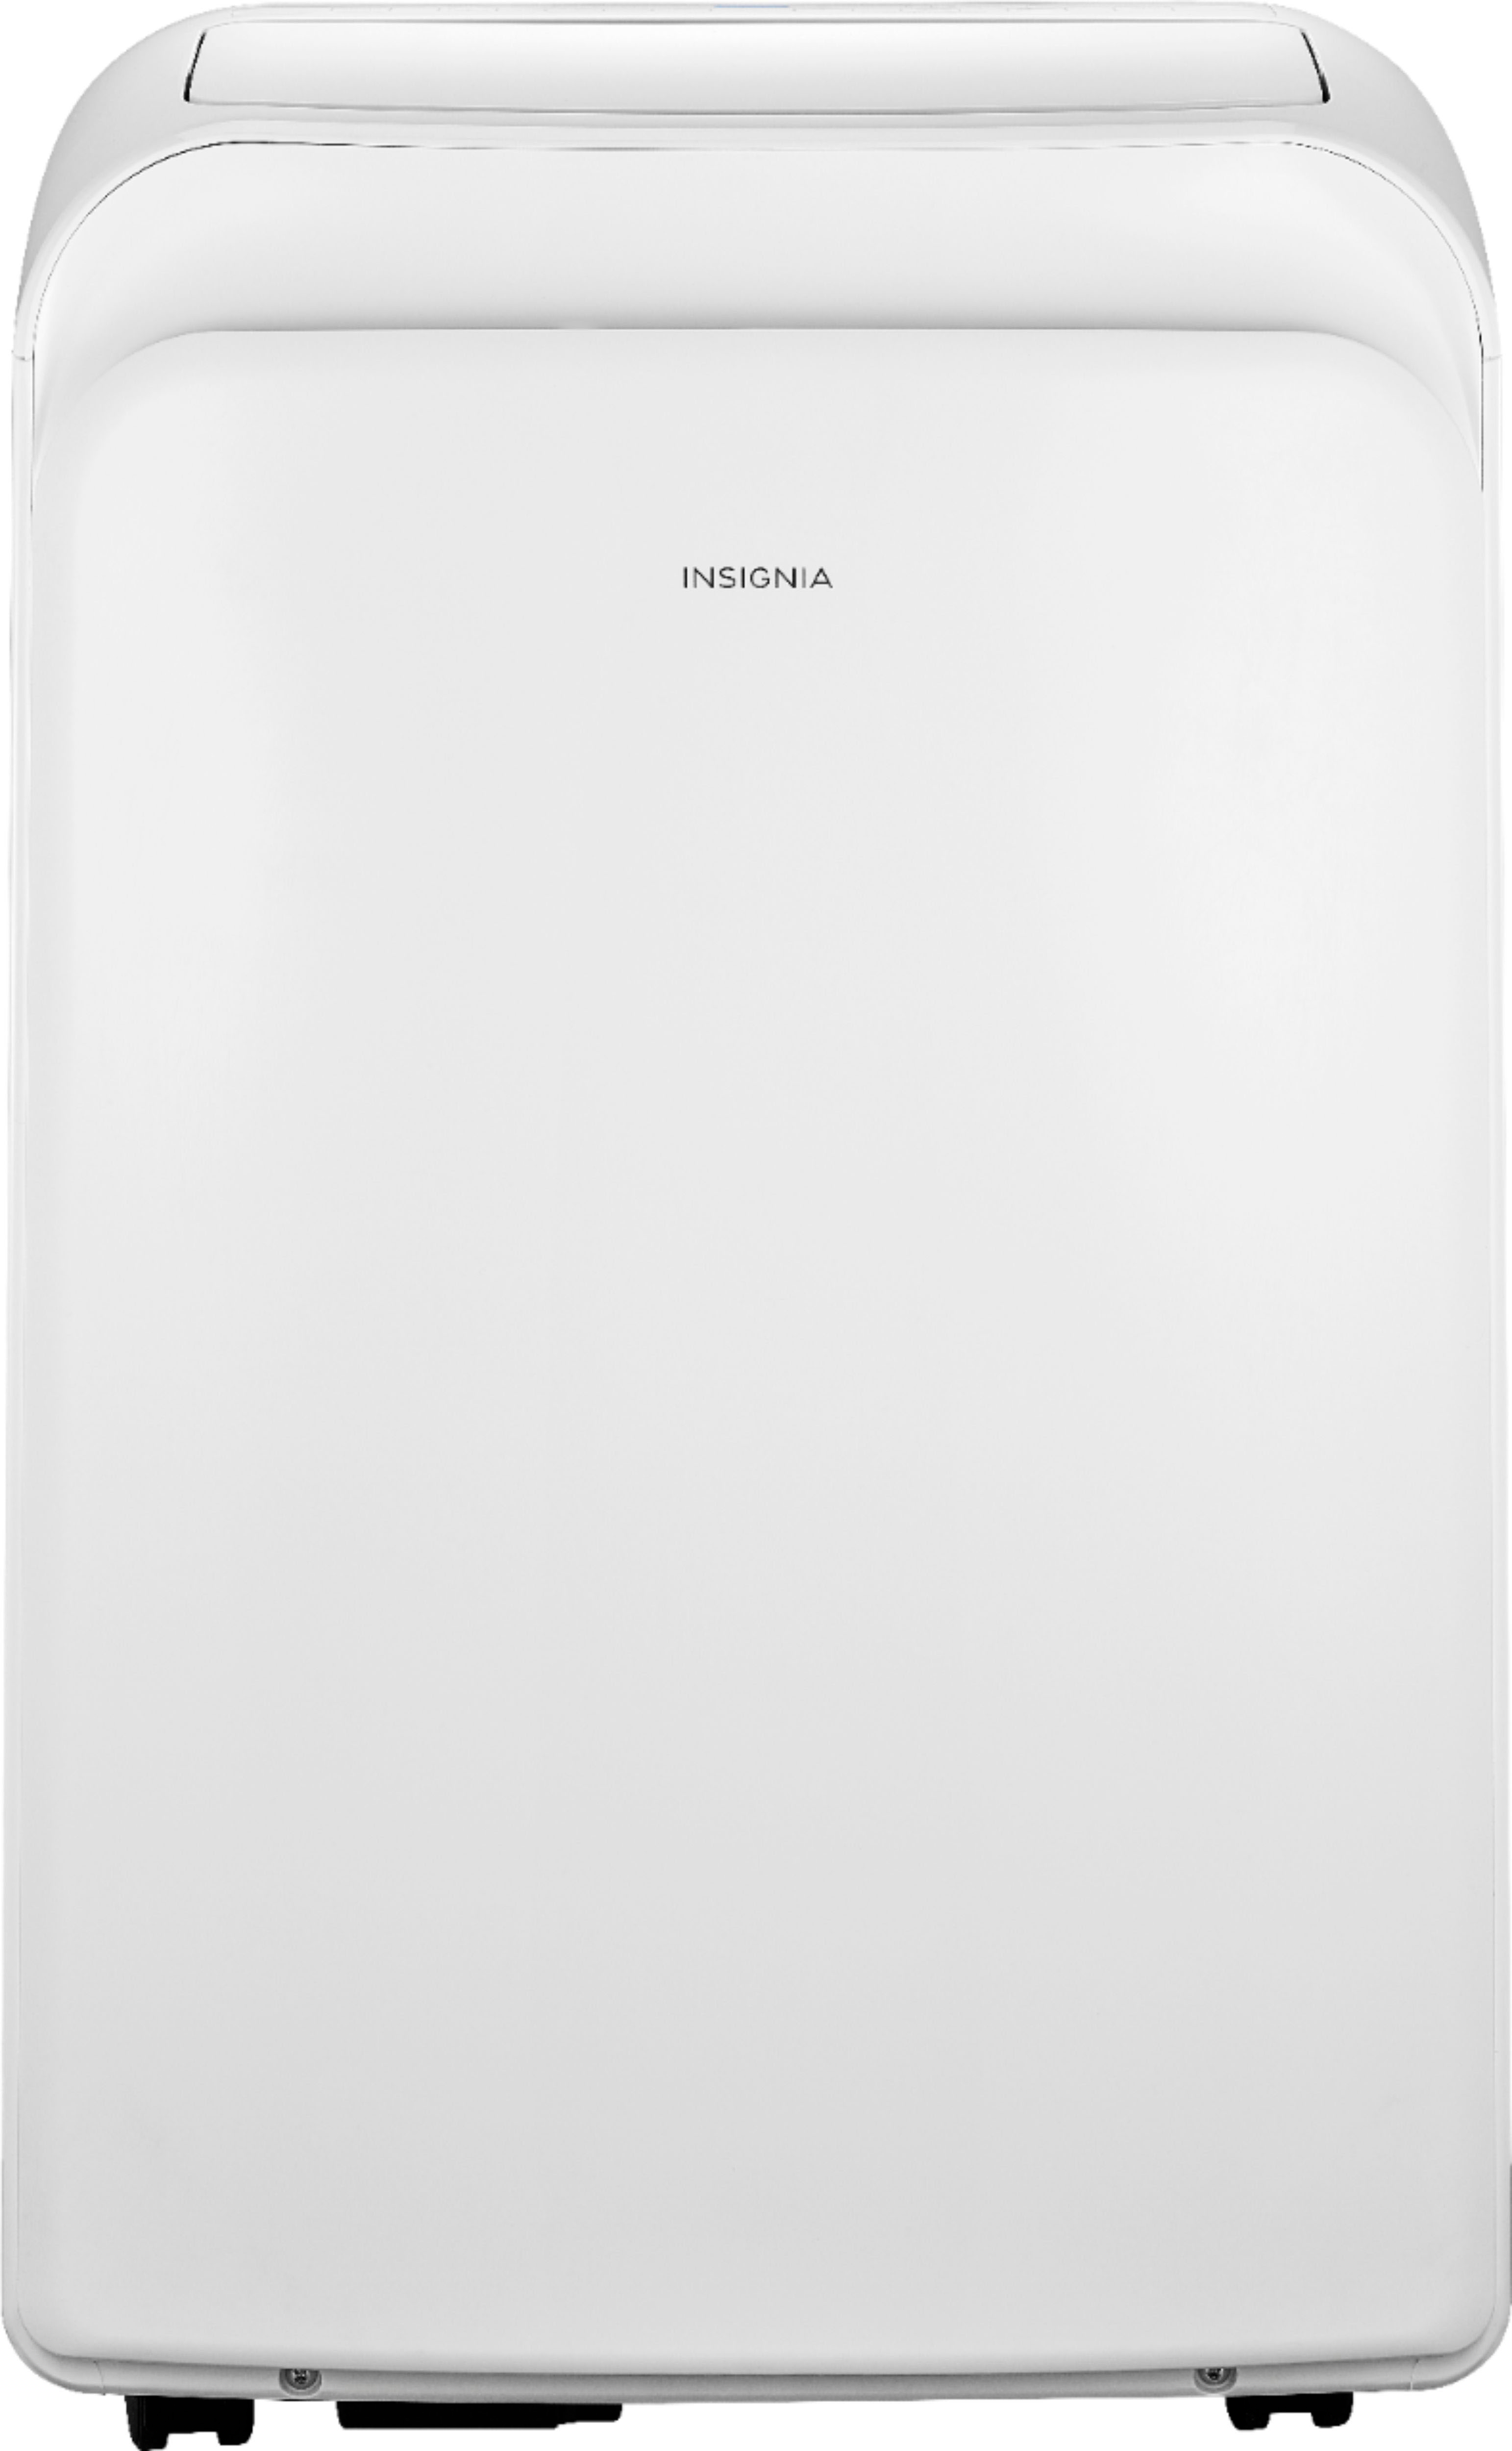 Insignia 300 Sq Ft Portable Air Conditioner White Ns Ac07pwh1 Best Buy